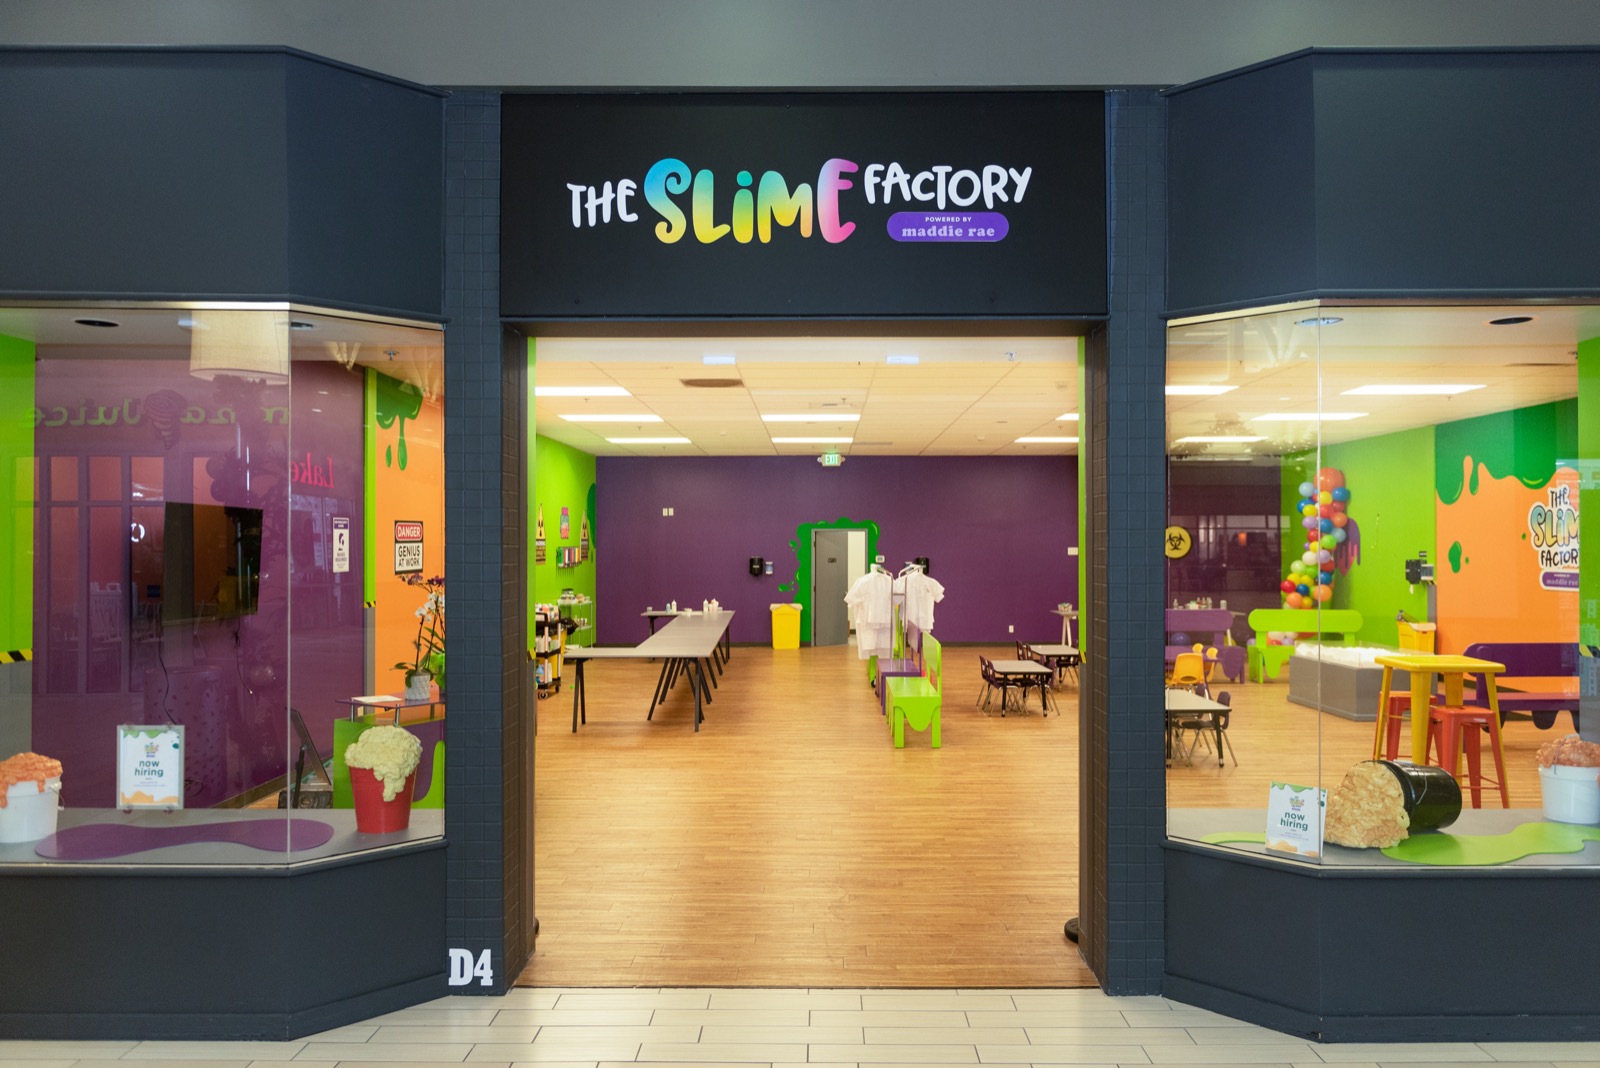 The Slime Factory Orlando - It's easier and faster when you book